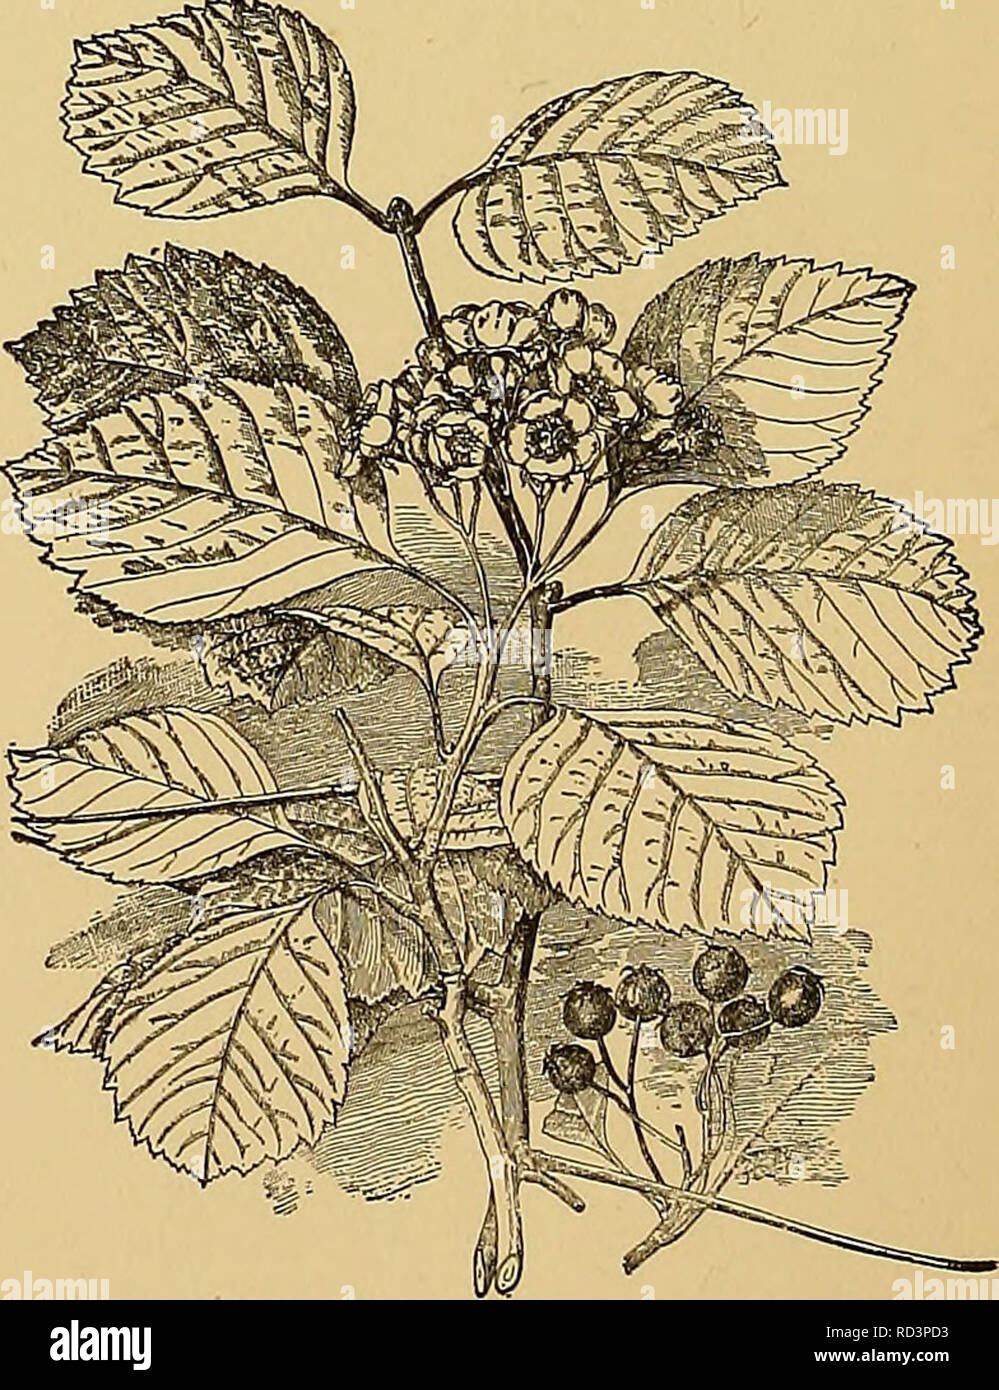 . Cyclopedia of American horticulture, comprising suggestions for cultivation of horticultural plants, descriptions of the species of fruits, vegetables, flowers, and ornamental plants sold in the United States and Canada, together with geographical and biographical sketches. Gardening. ii^uo 576. Crataegus punctata. lous; fls. fragrant; calyx-teeth glandular-serrate: fr. % in. in diam. May, June. Quebec to Va., west to Mo. and Dak. S.S. 4:181. B.R. 22:1912. L.B.C. 11:1012 (as C. glandulosa). A.G. 11:509. —Sometimes cultivated under the name of G. Douglasi. Var. succul6nta, Rehd. {C. sucGuI^nf Stock Photo